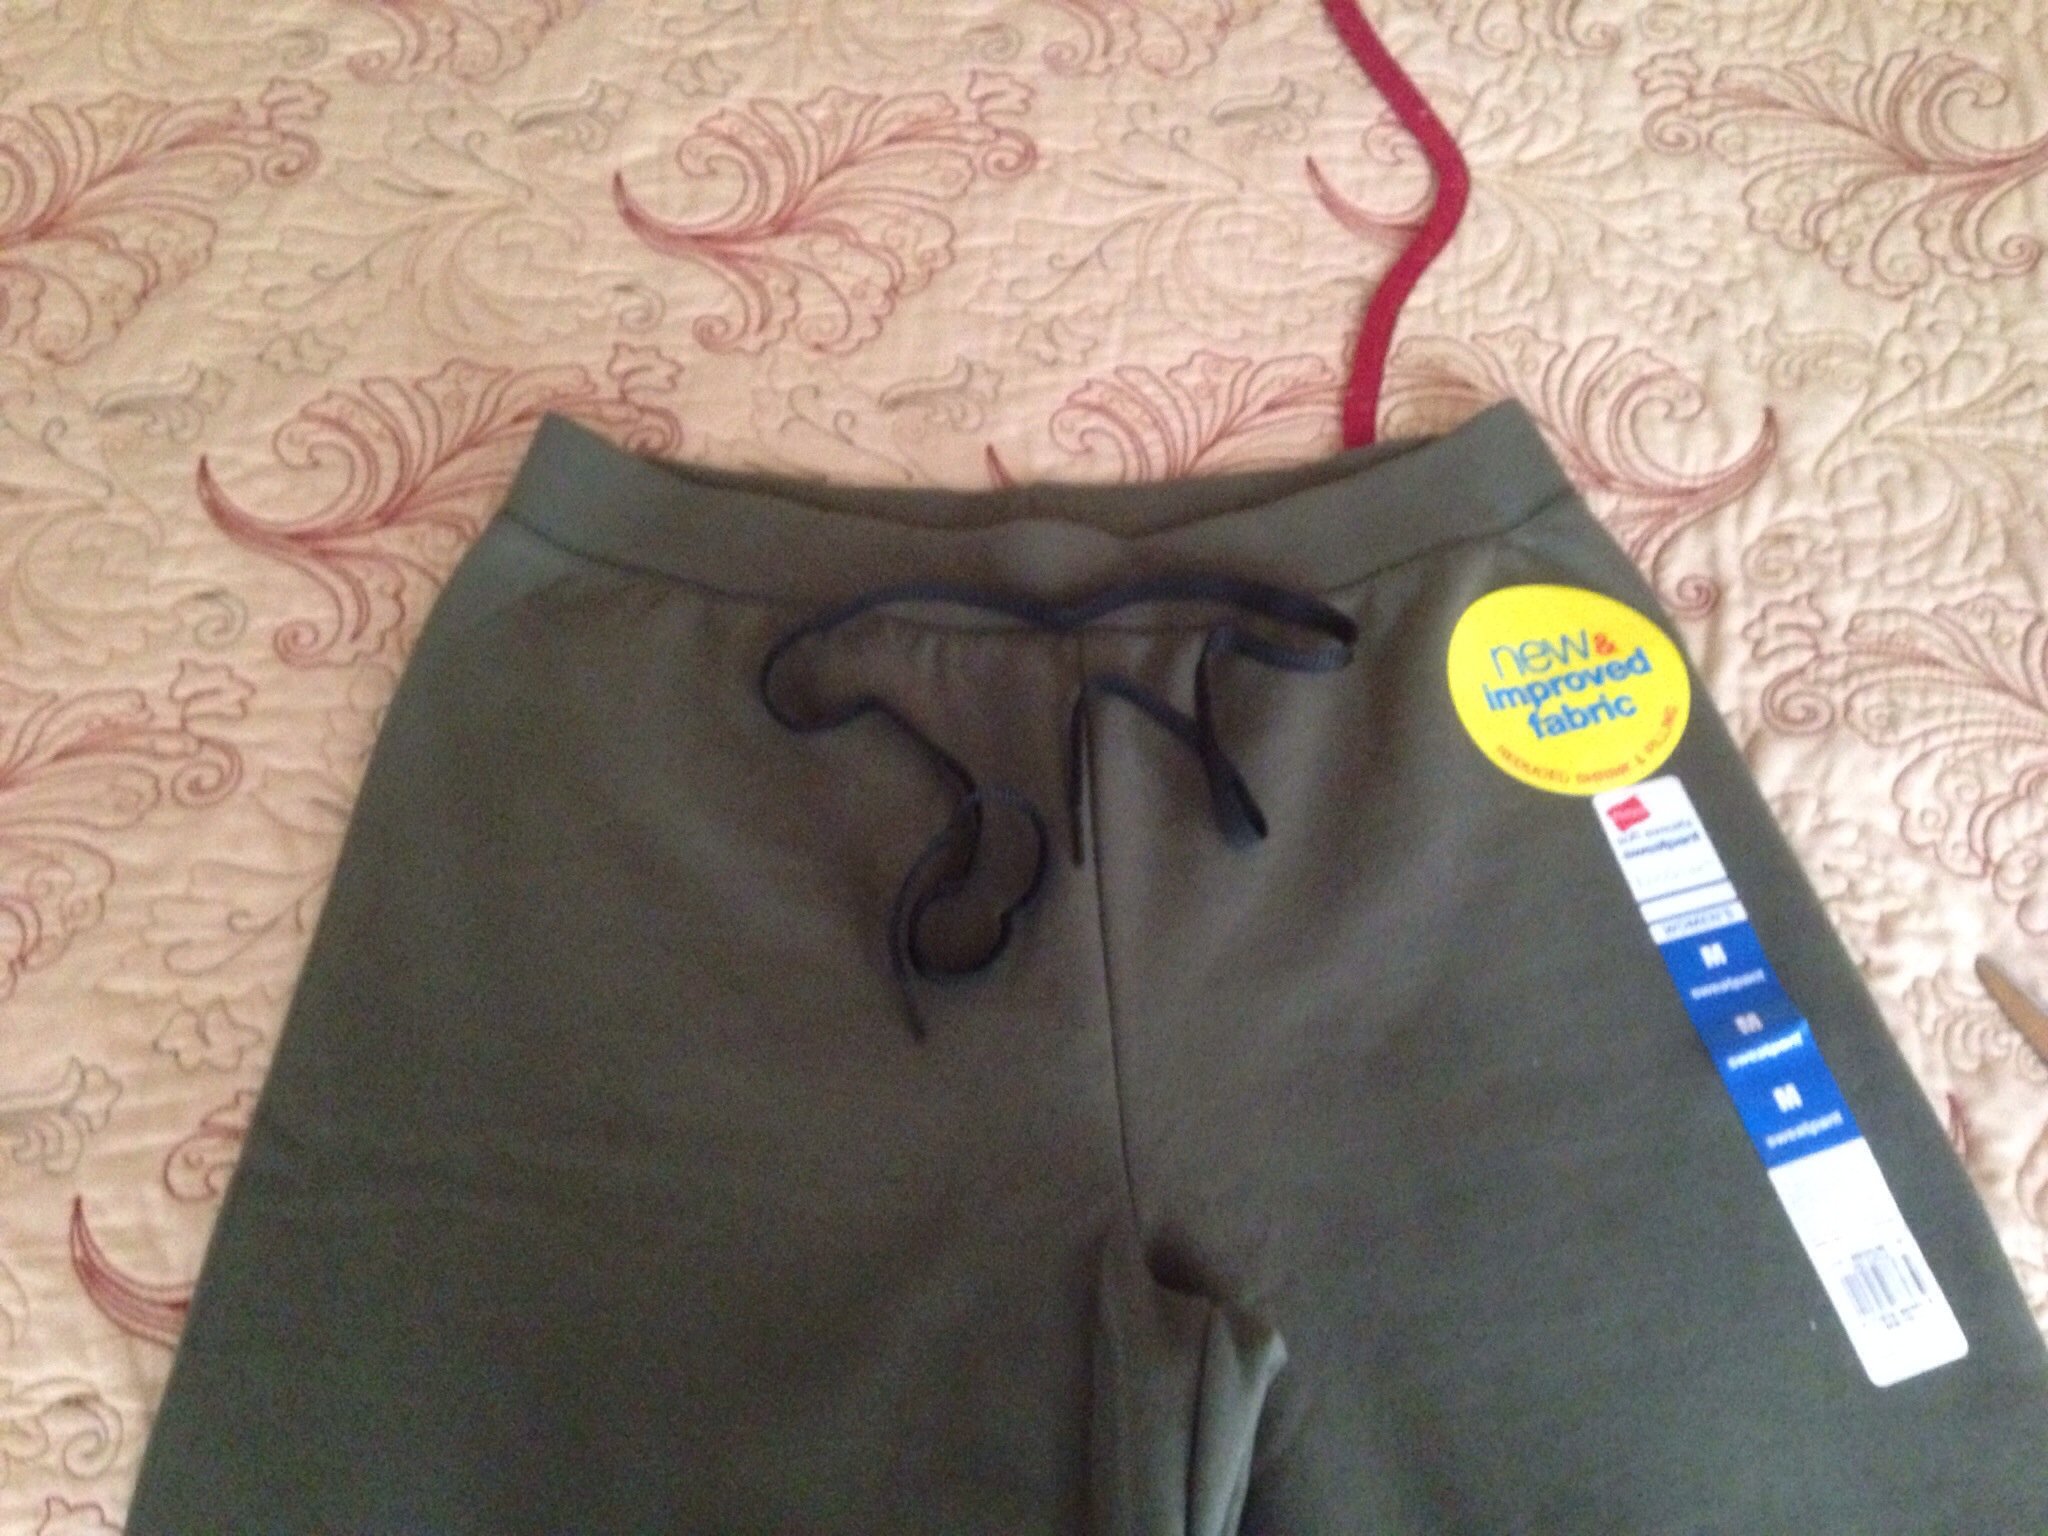 Is it possible to replace the elastic in the waistband without damaging the  shorts? : r/sewing